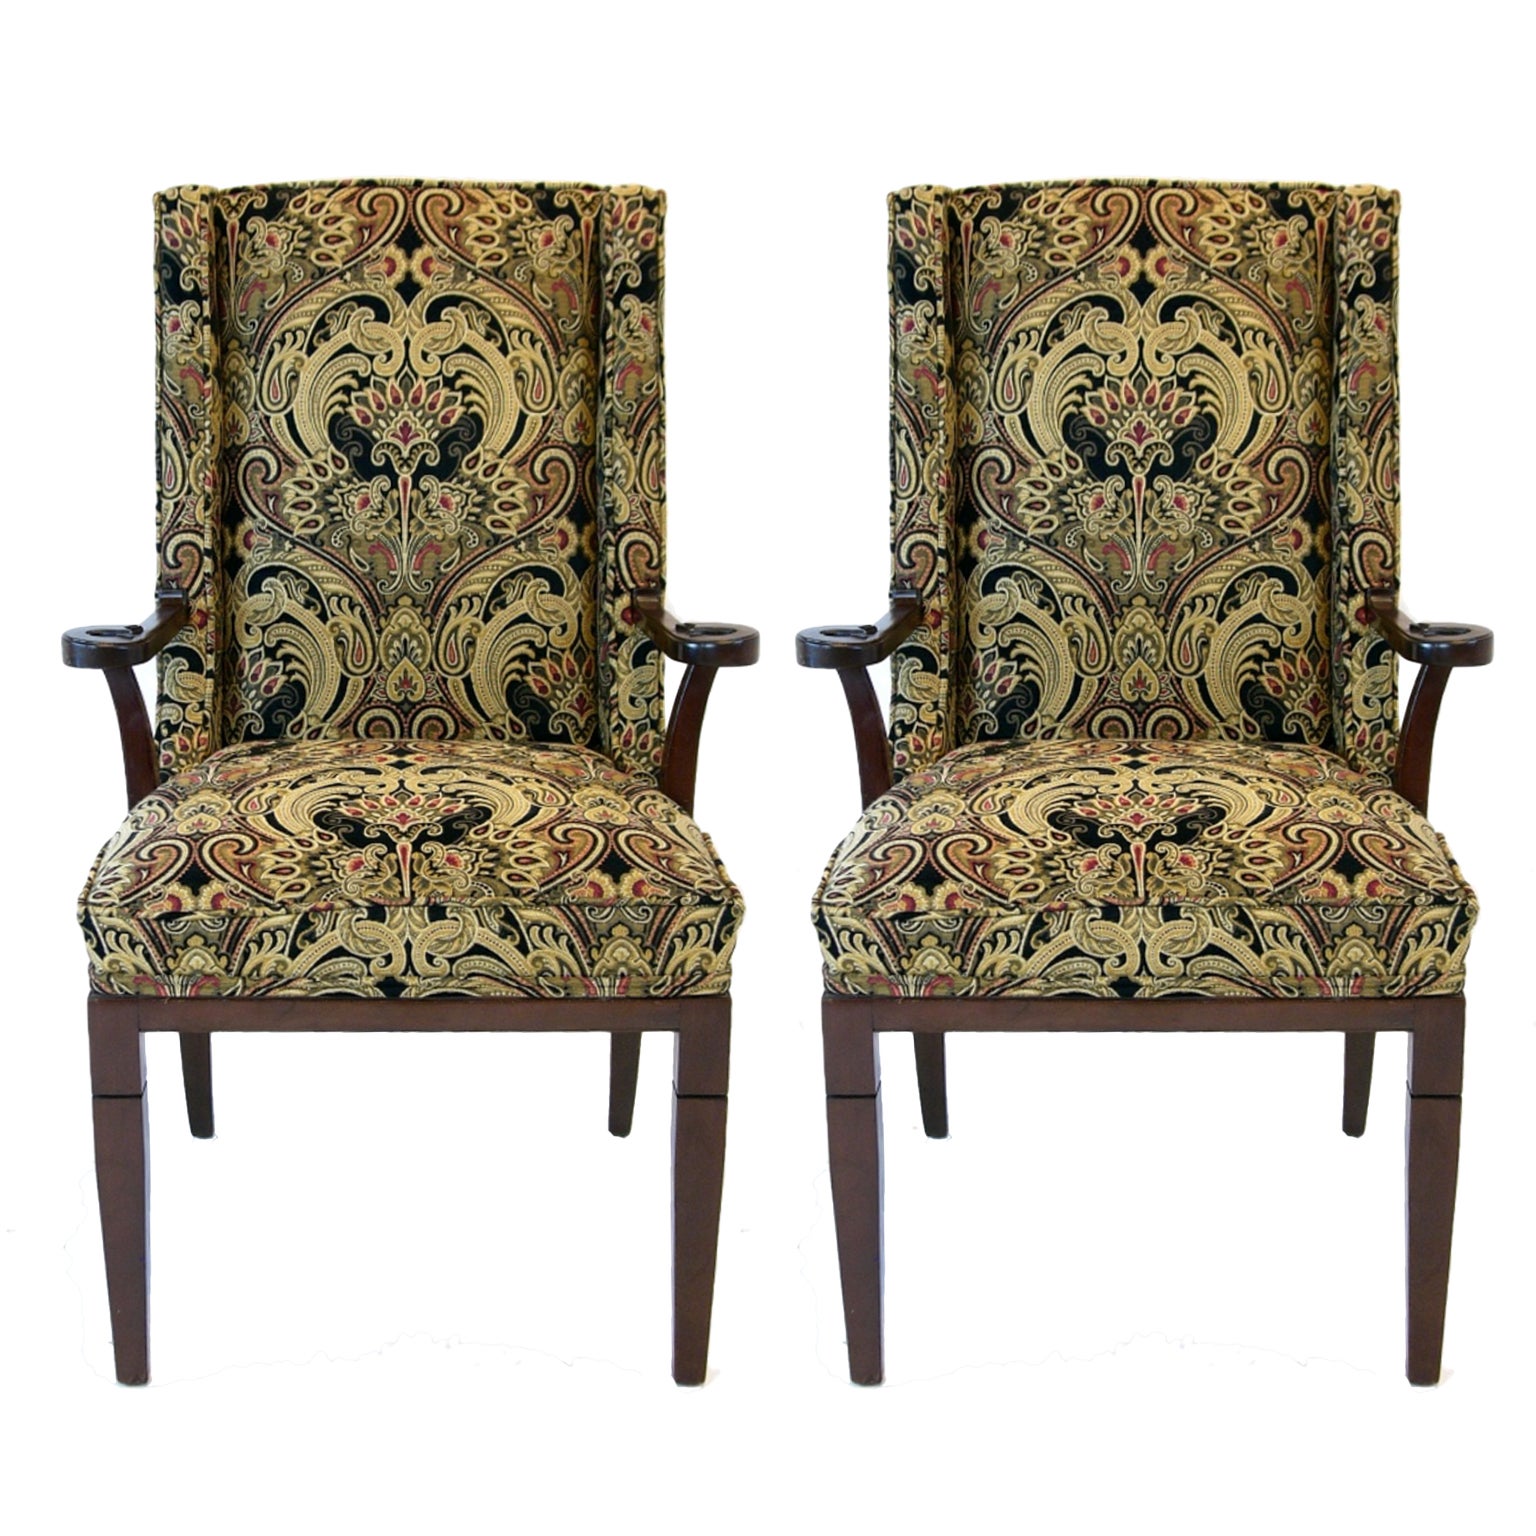 Pair of Tommi Parzinger Chairs with Tapestry Upholstery for Charak